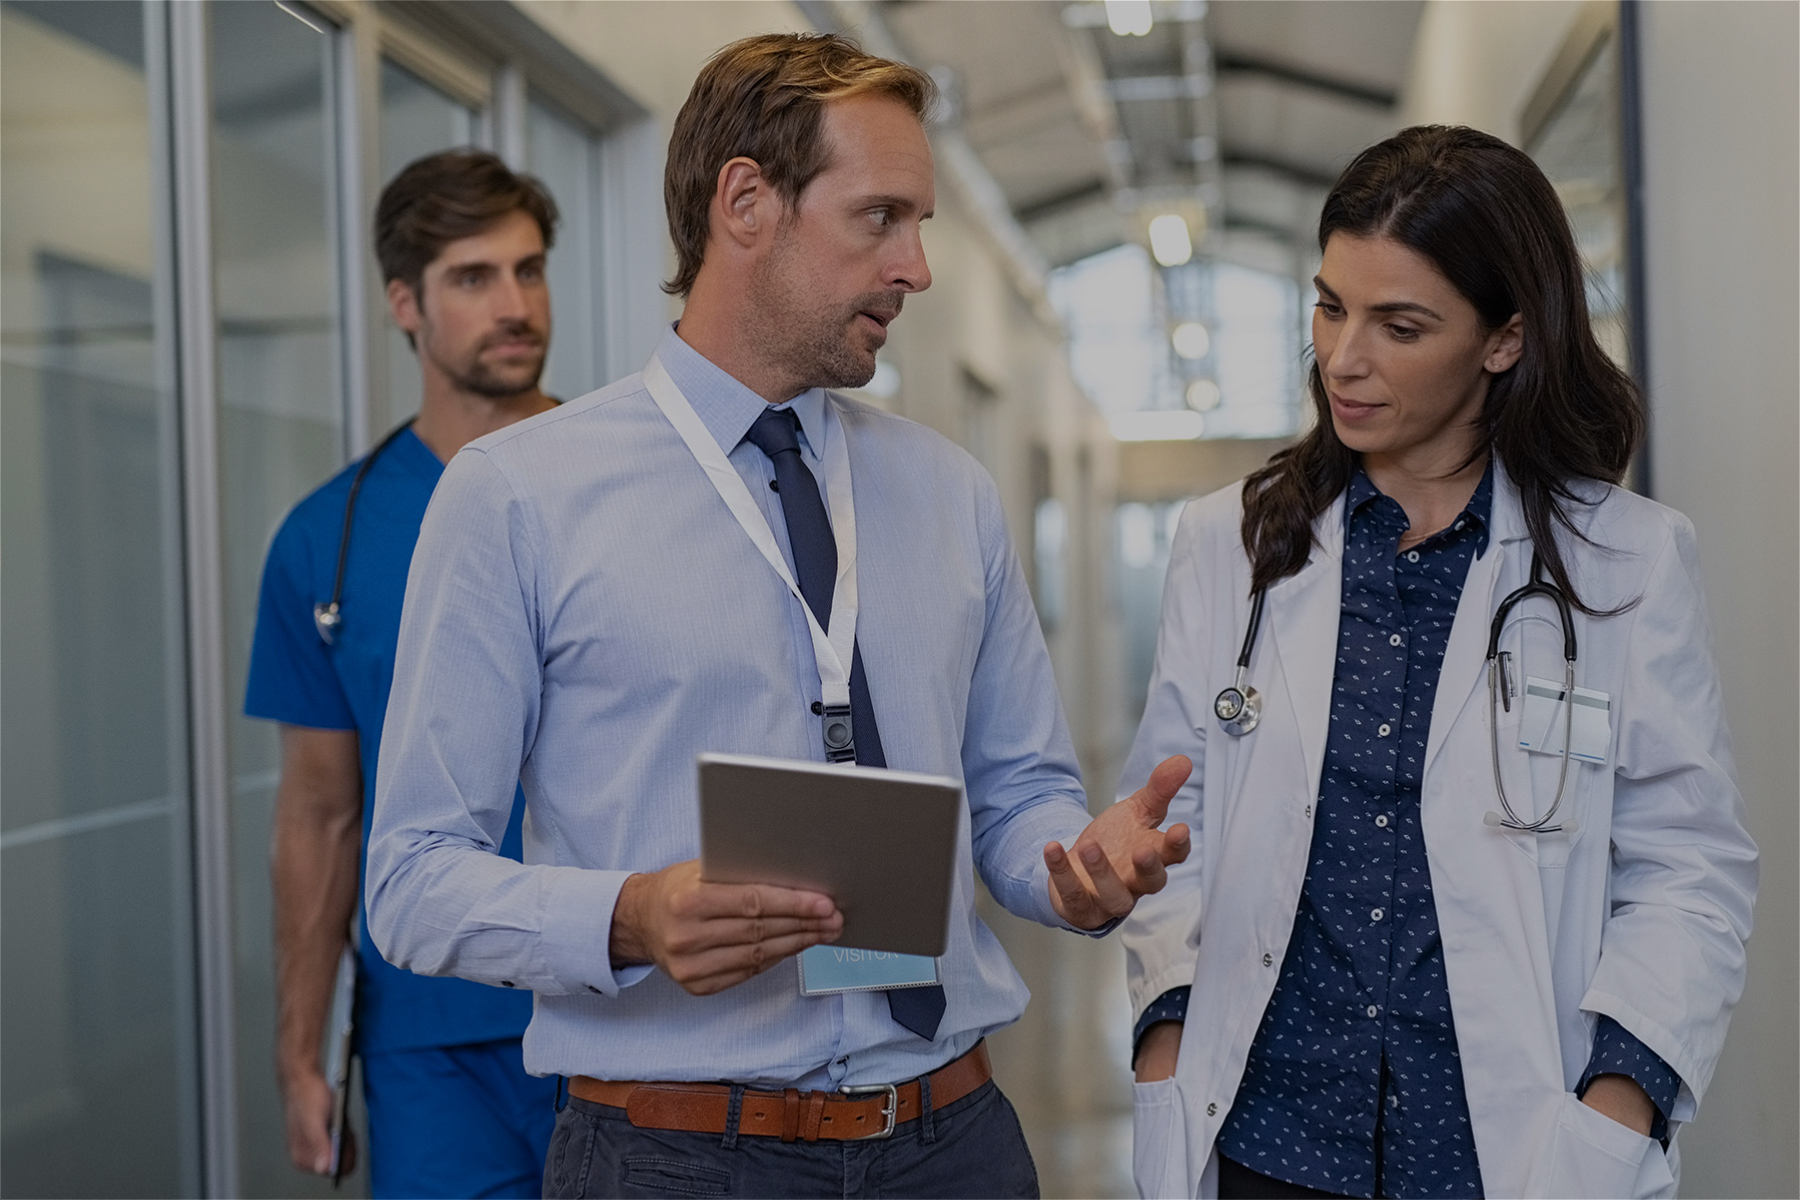 Image of a business man holding a clipboard talking to a doctor with a nurse walking behind them